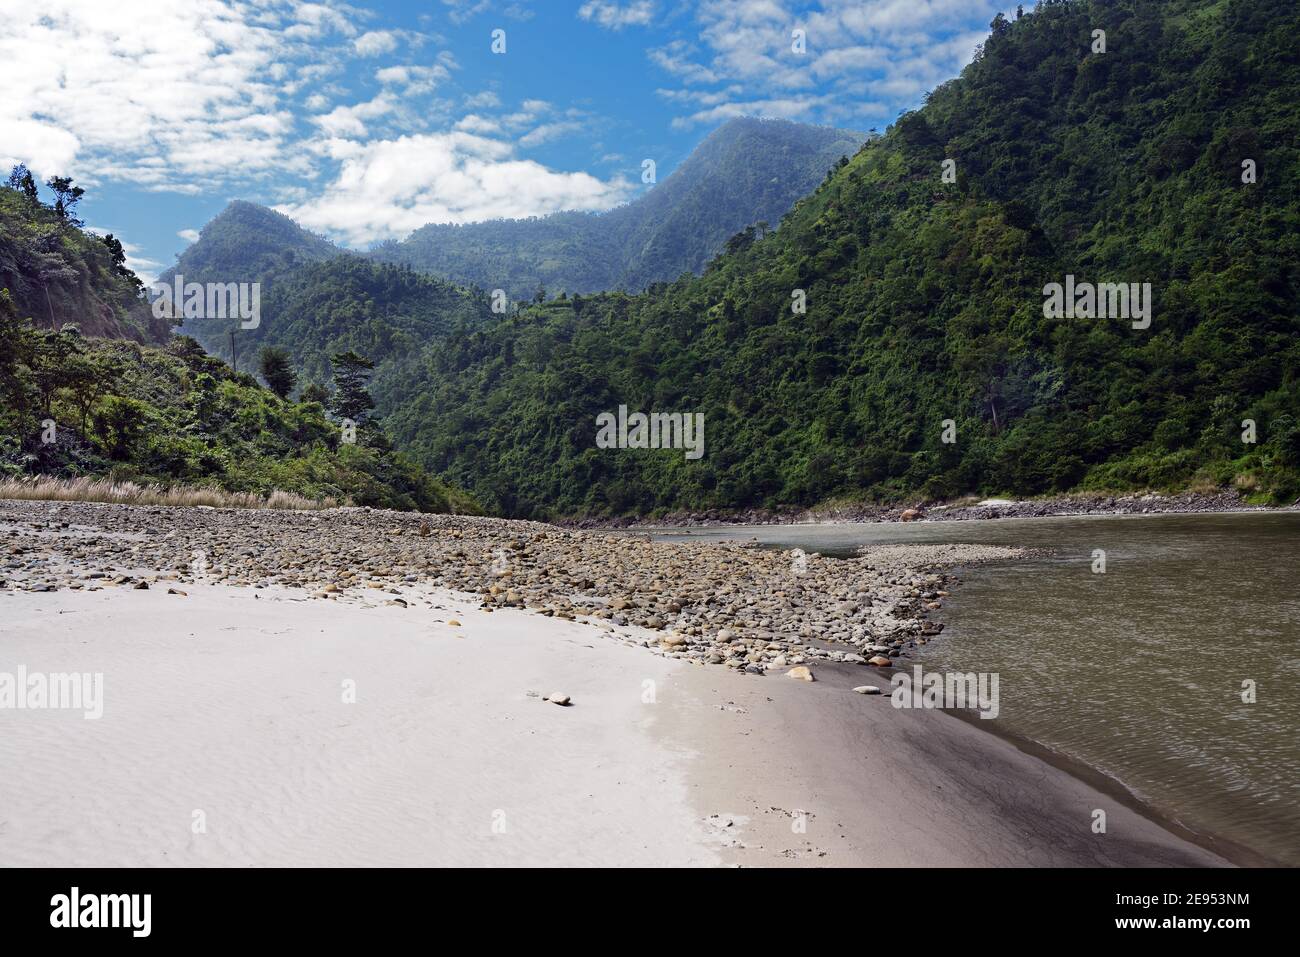 The Trishuli River is a major tributary of the Narayani River in central Nepal but originates in Tibet. Here it is adjacent to the Prithvi Highway. Stock Photo